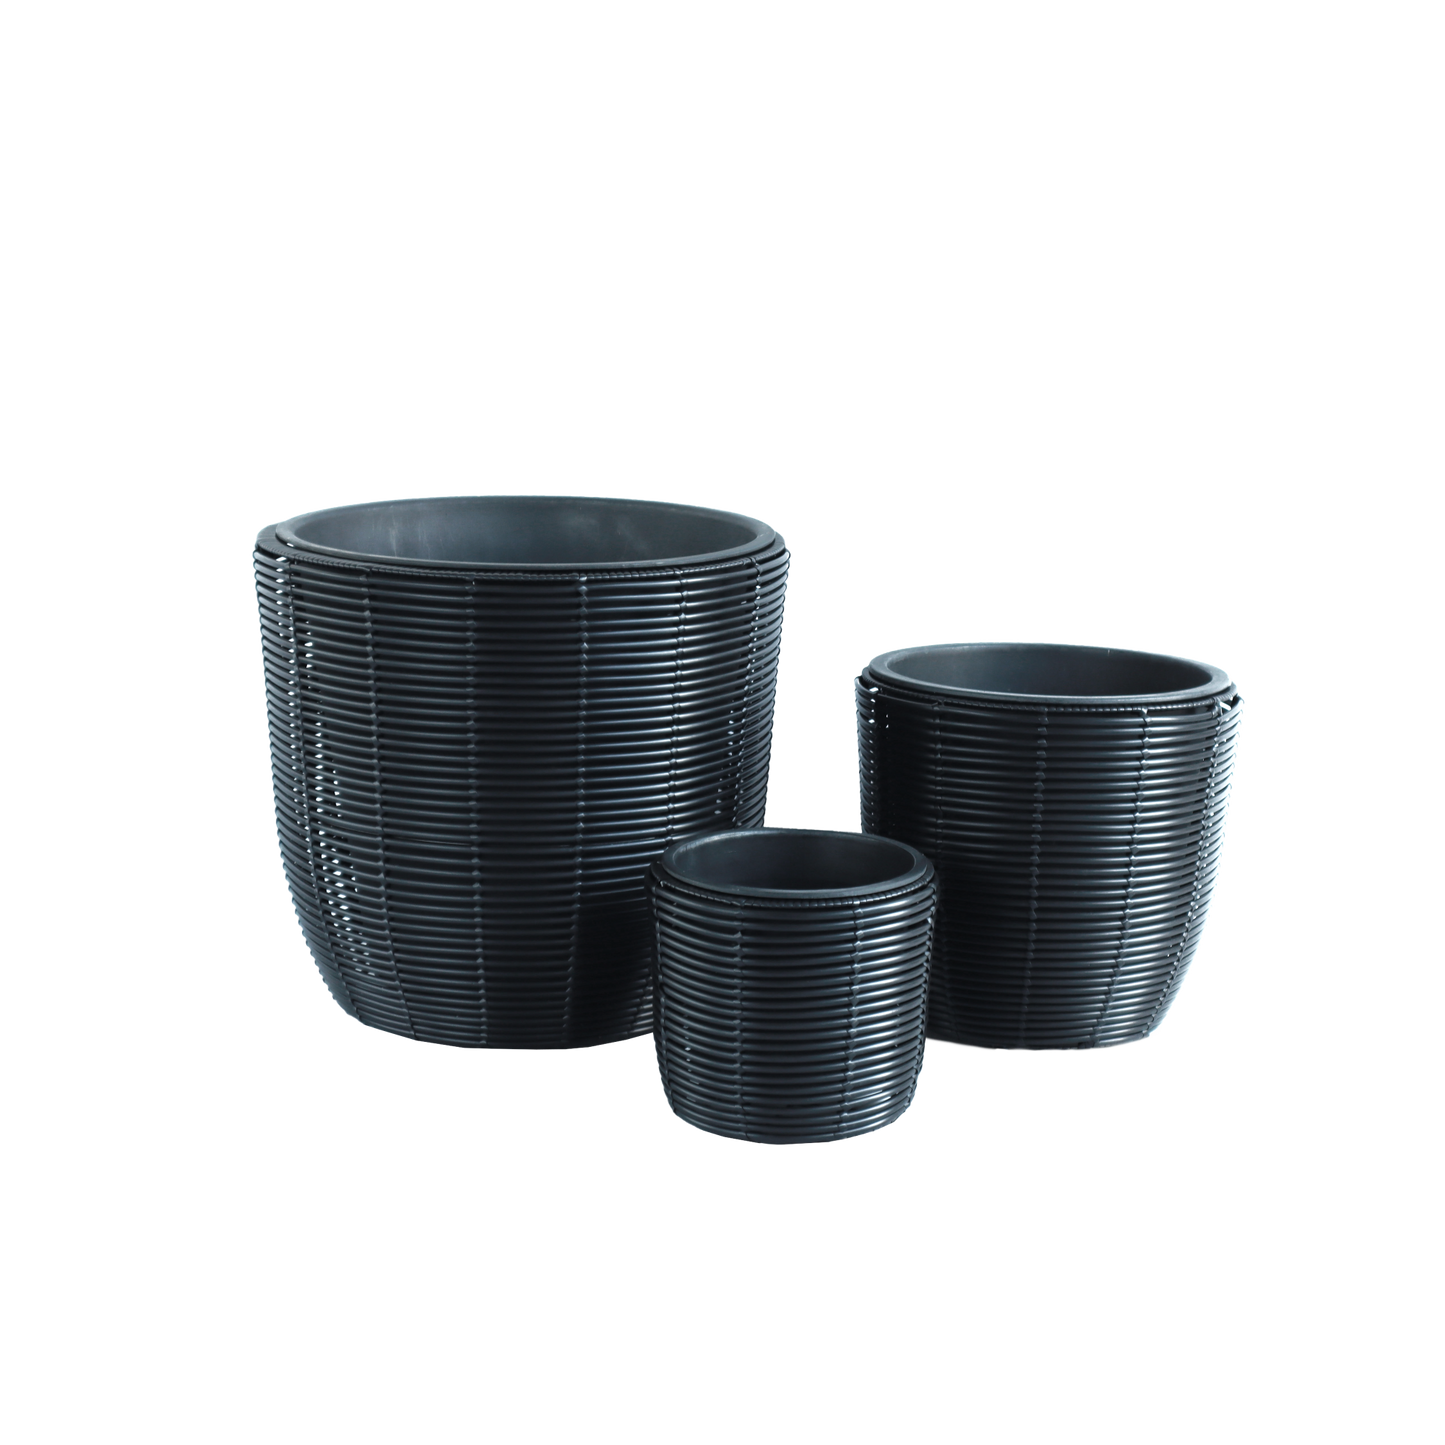 Eden Grace Set of 3 Hand Woven Round Wicker Planters - Made with Eco-Friendly Resin - Comes with Polyethylene Pot inside